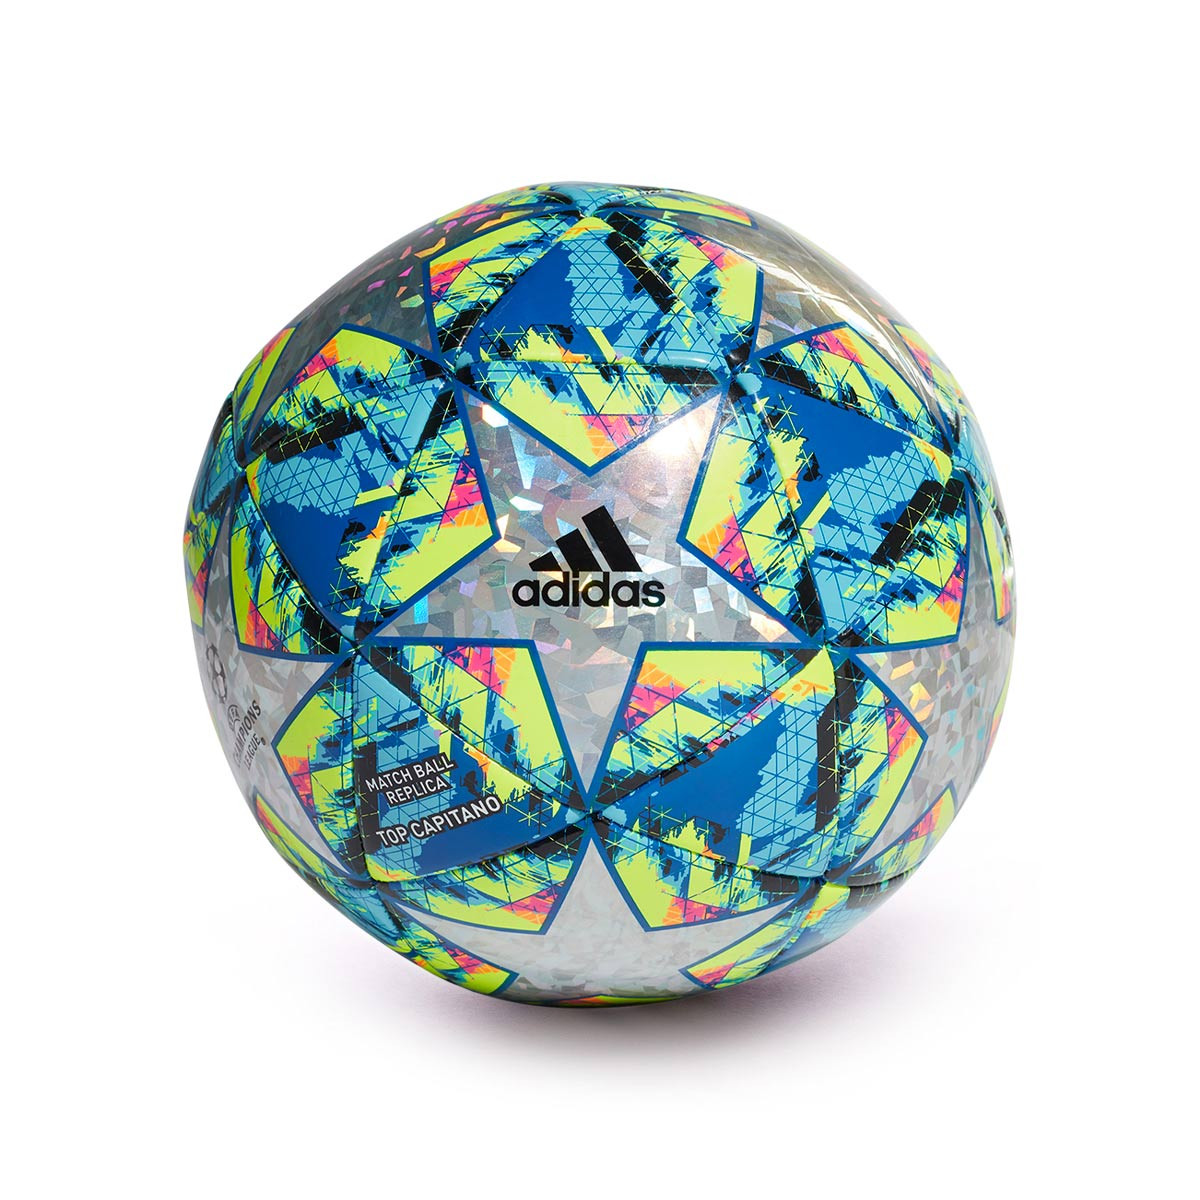 ucl finale 19 capitano ball